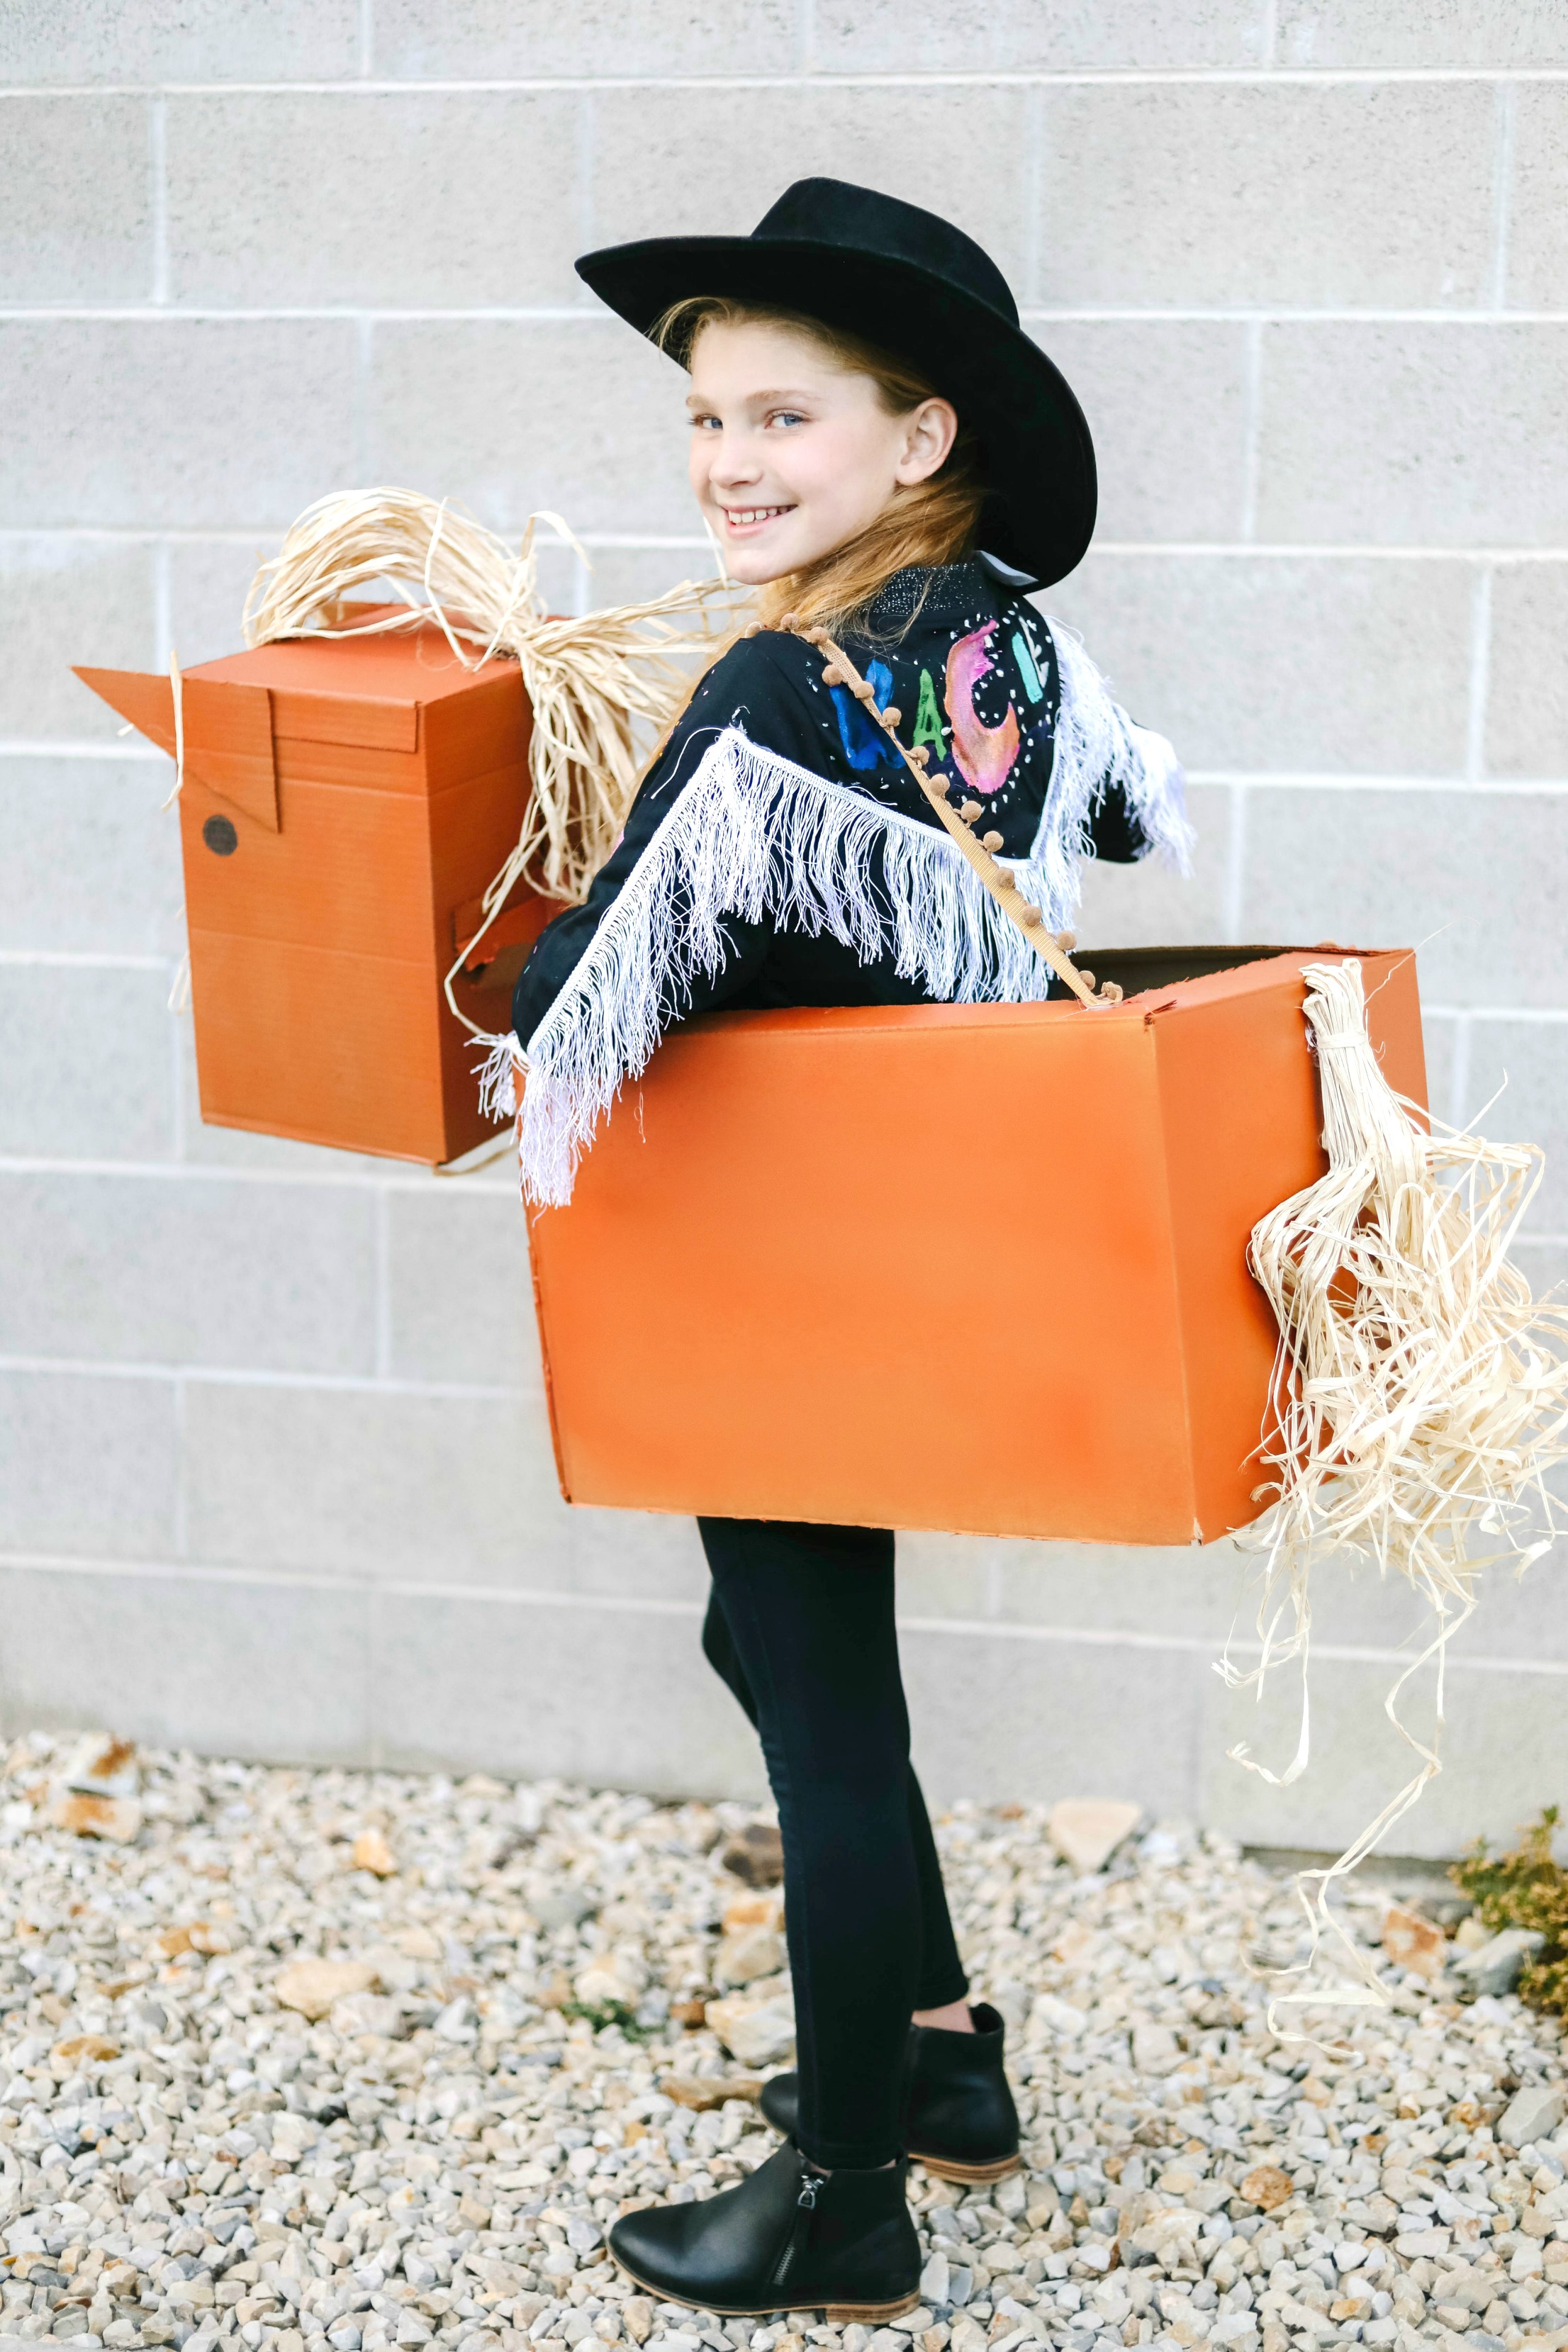 ﻿"Old Town Road" Western Boxtume DIY. Turn a catchy western song into an easy Halloween costume with Amazon Prime smile boxes and some creativity! 